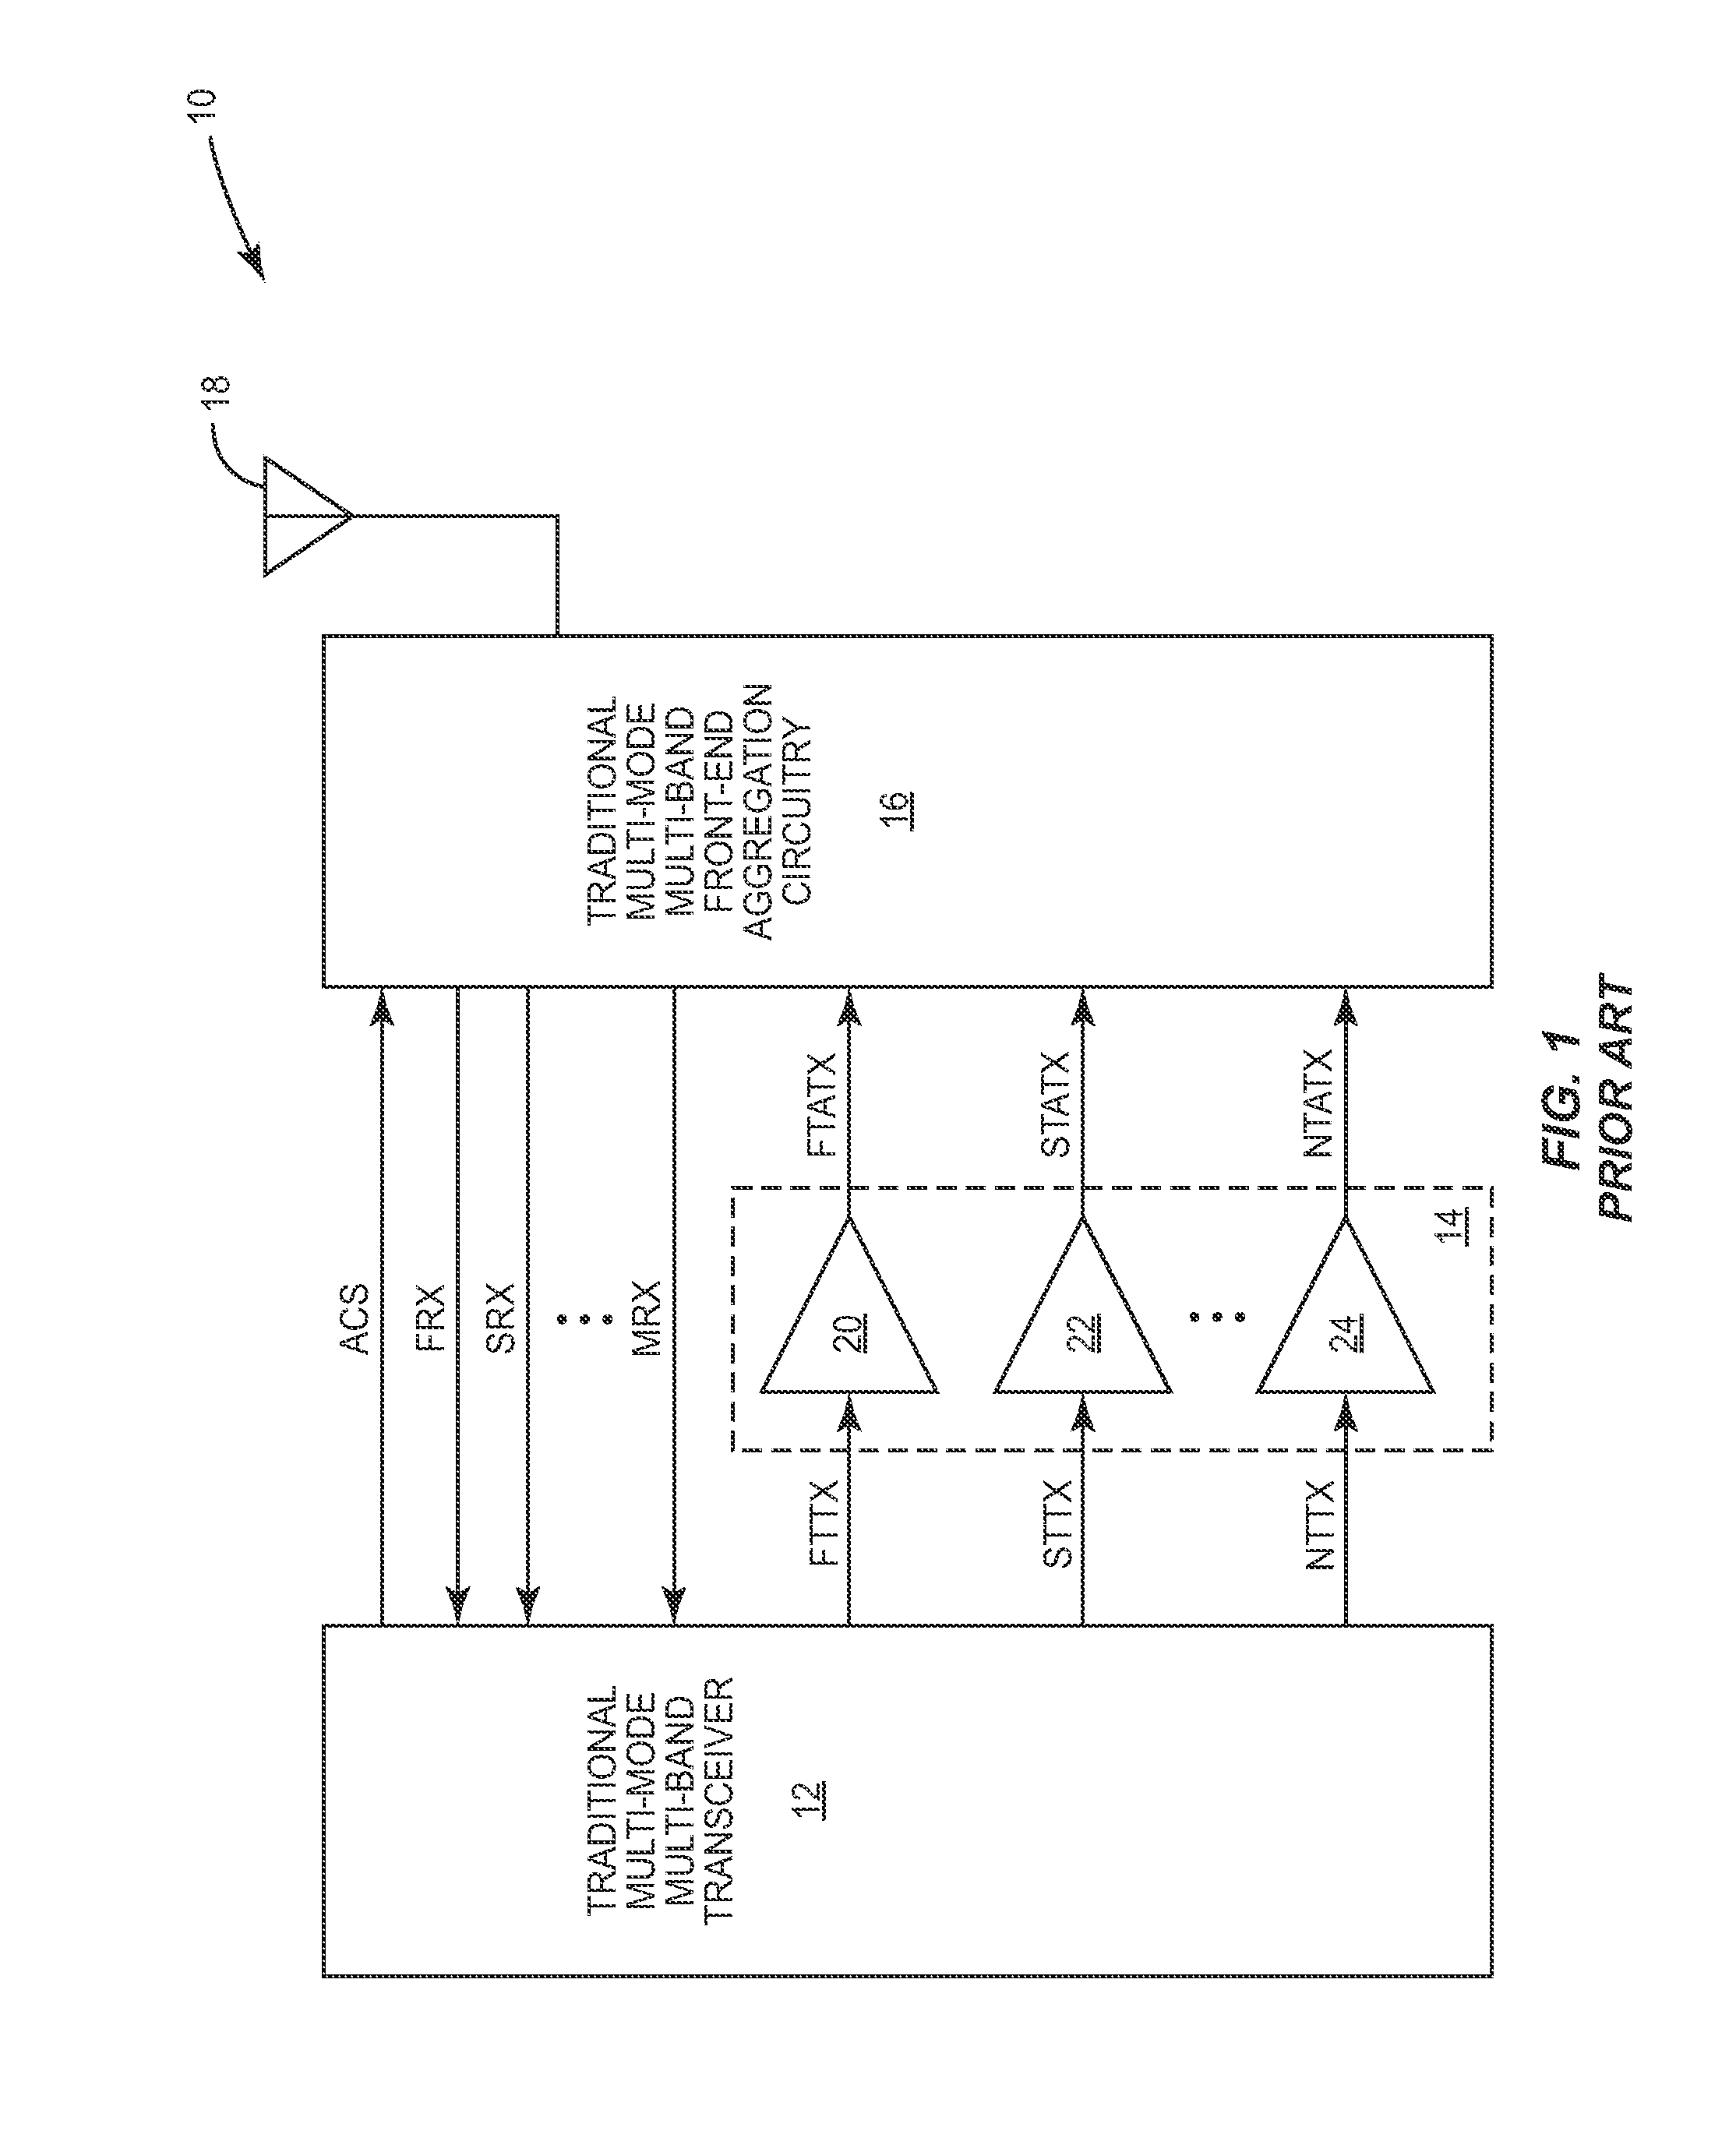 Configurable 2-wire/3-wire serial communications interface